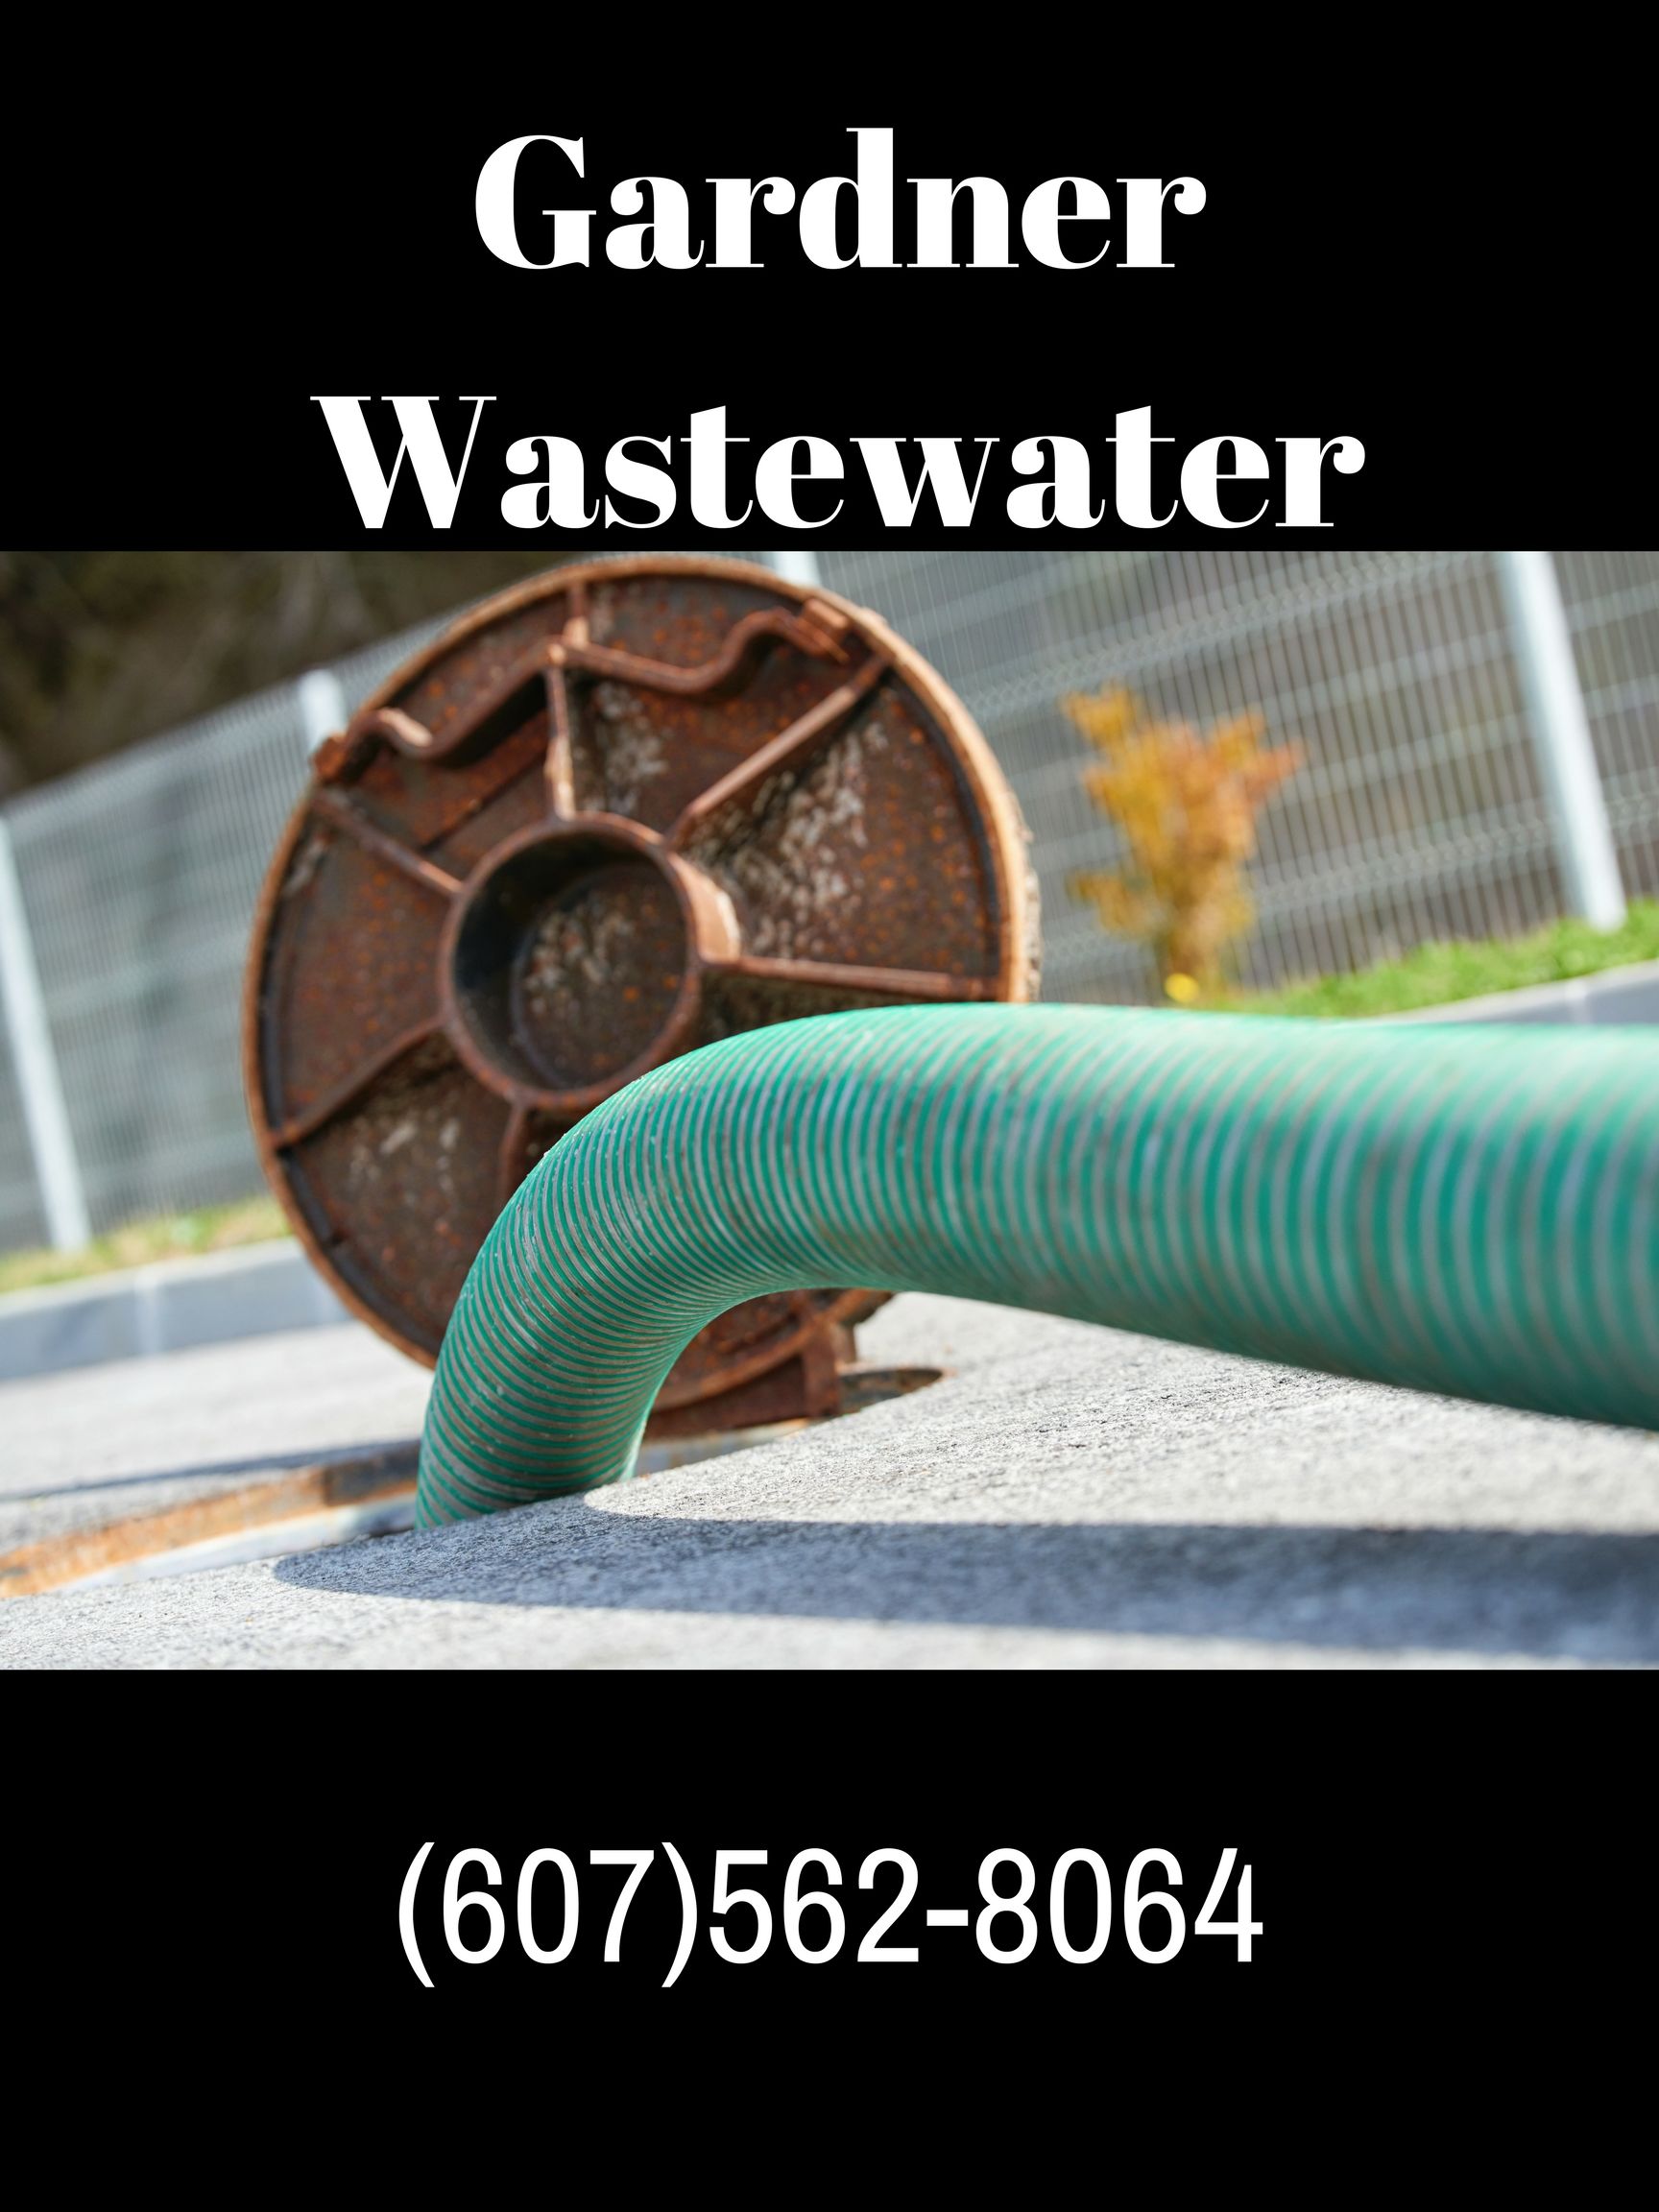 Septic Service, Septic Pumping, Grease Trap Pumping, Commercial And Industrial Pumping, Repairs, Installations, Septic Tank Services, Septic Repair